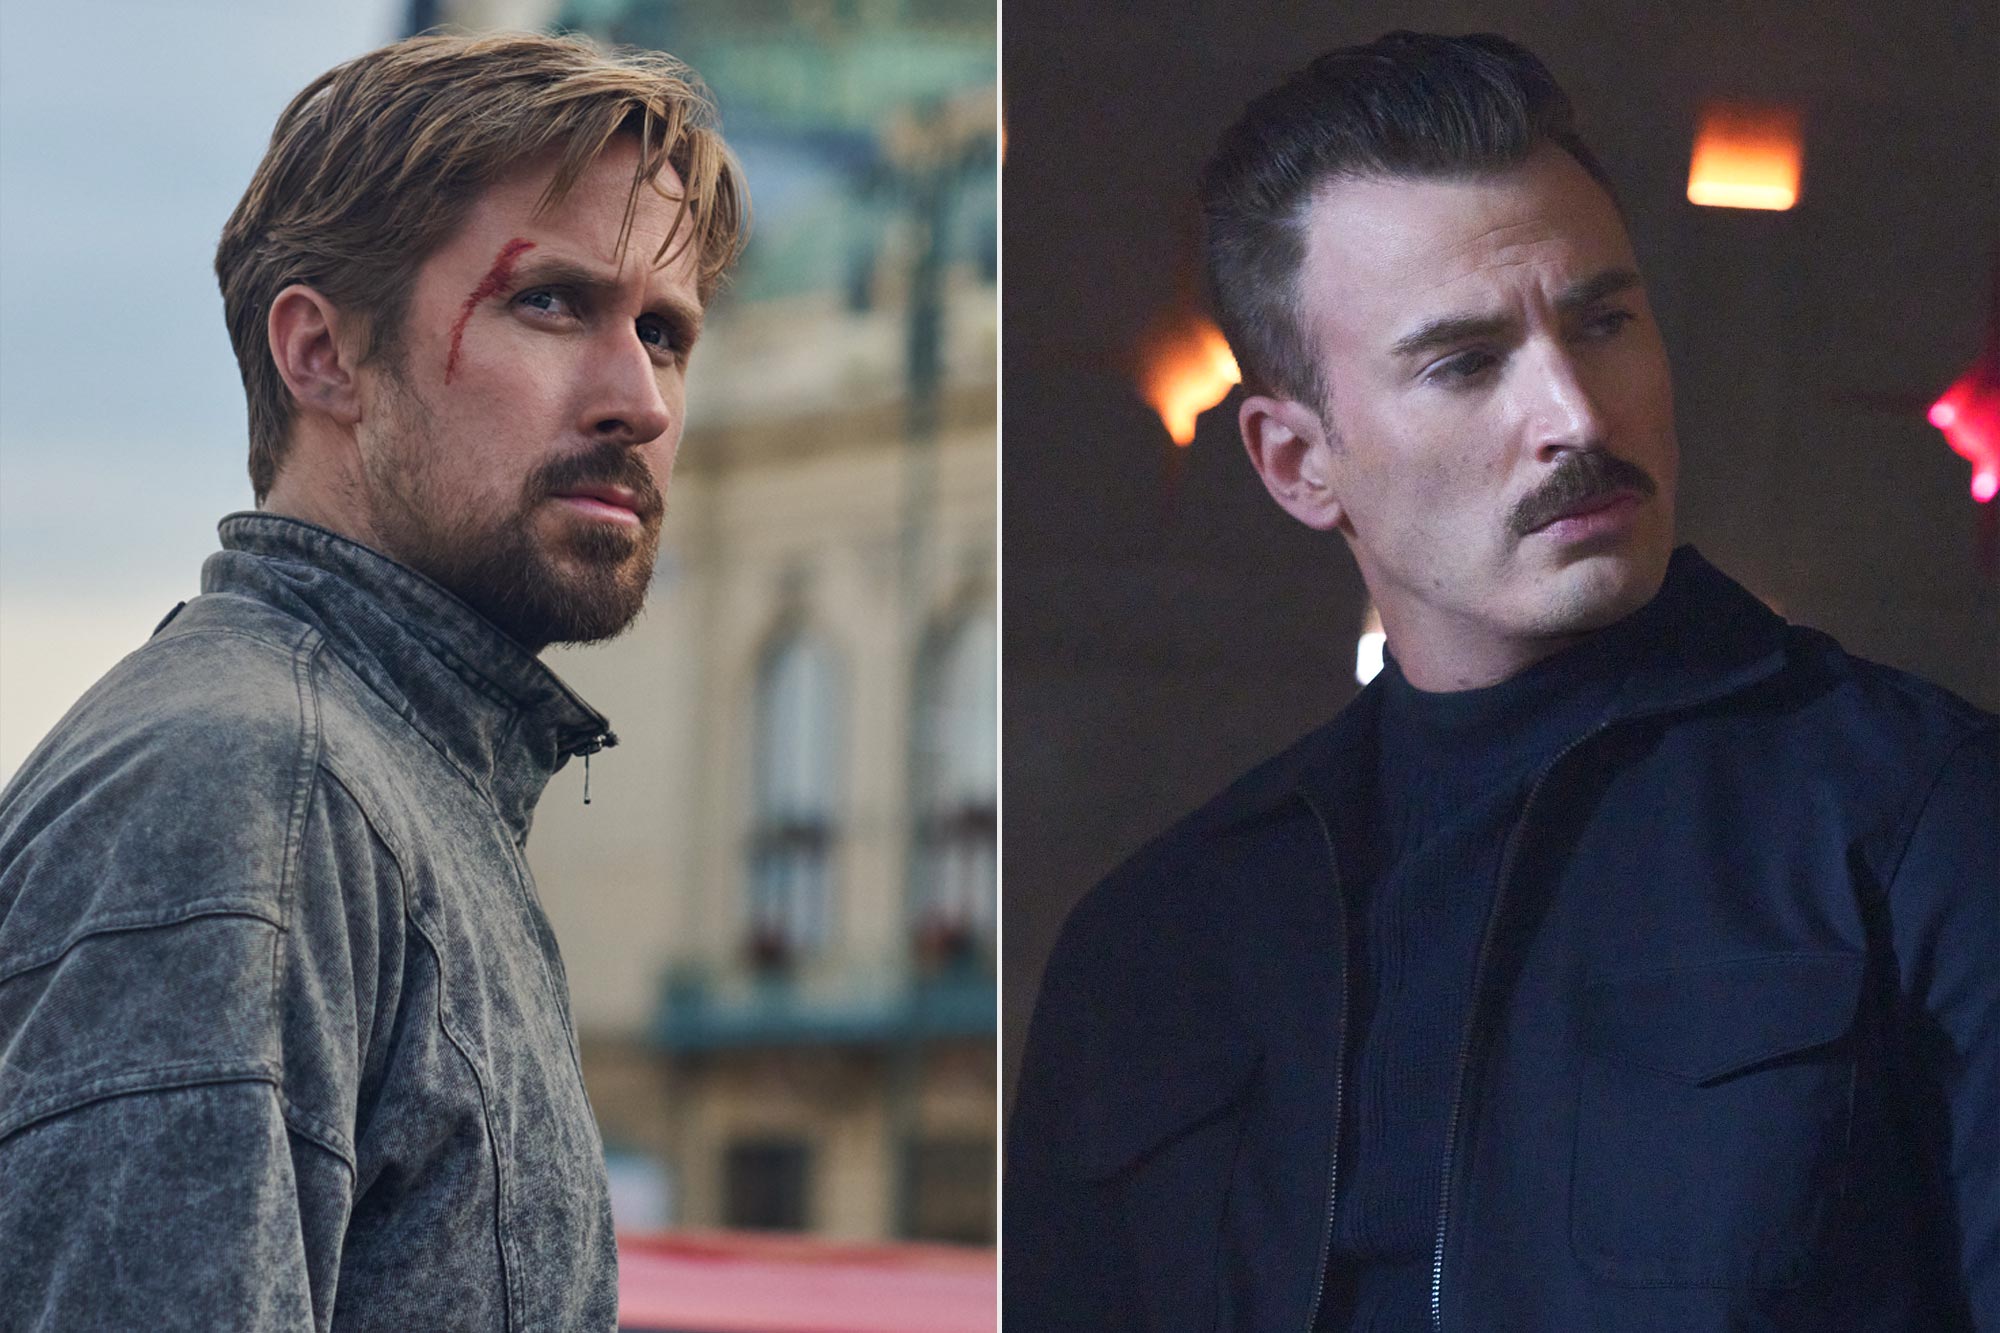 Chris Evans and his 'trash stache' hunt Ryan Gosling in heart-pounding The Gray Man trailer